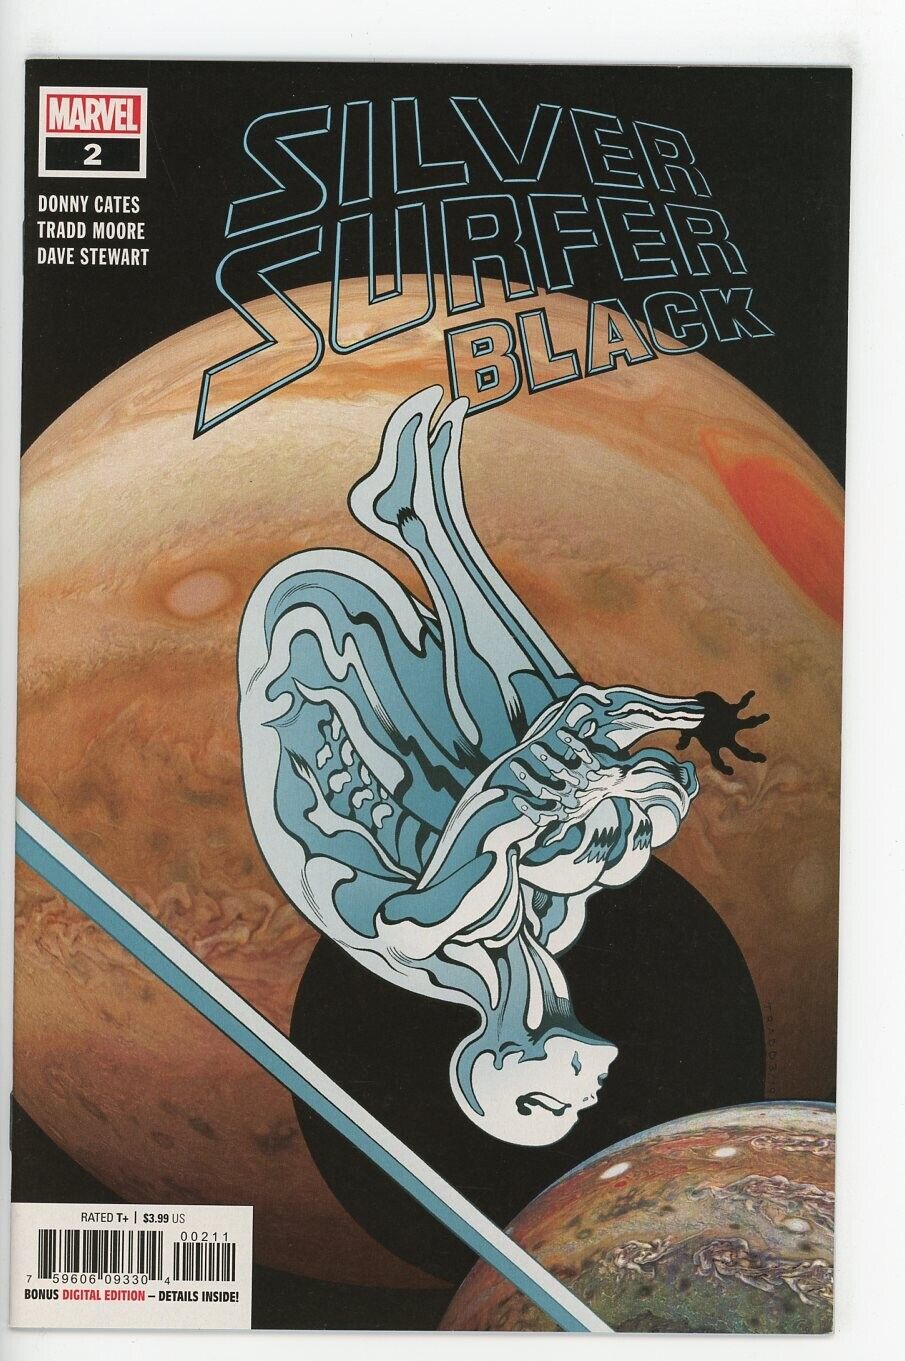 SILVER SURFER: BLACK #2 NM SILVER SURFER BECOMES VOID KNIGHT 2019 MOORE CV b-182